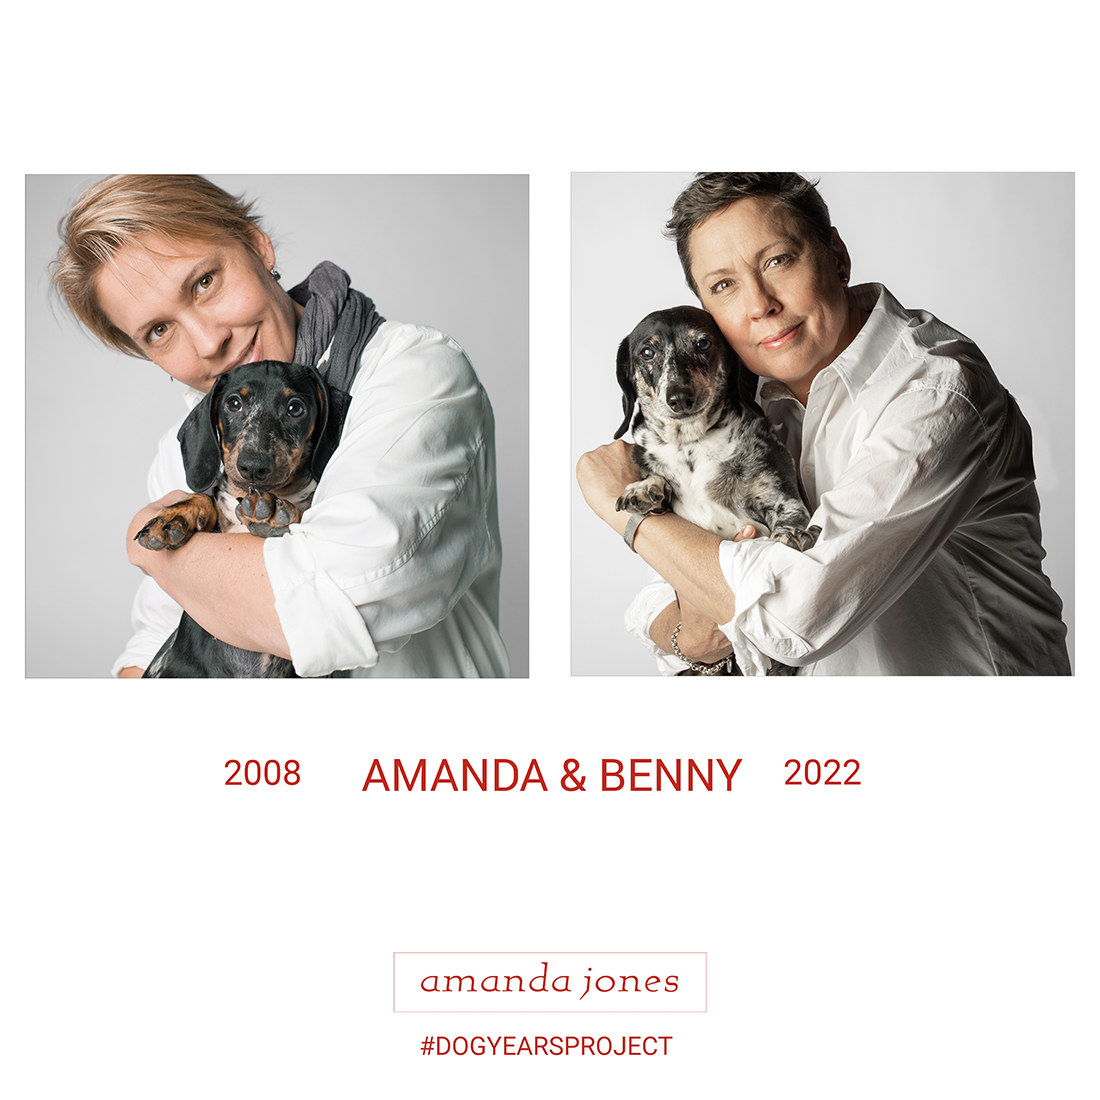 image of a woman holding her dog in the year 2008 and then again in the year 2022 to show the difference in the dogs age and appearence